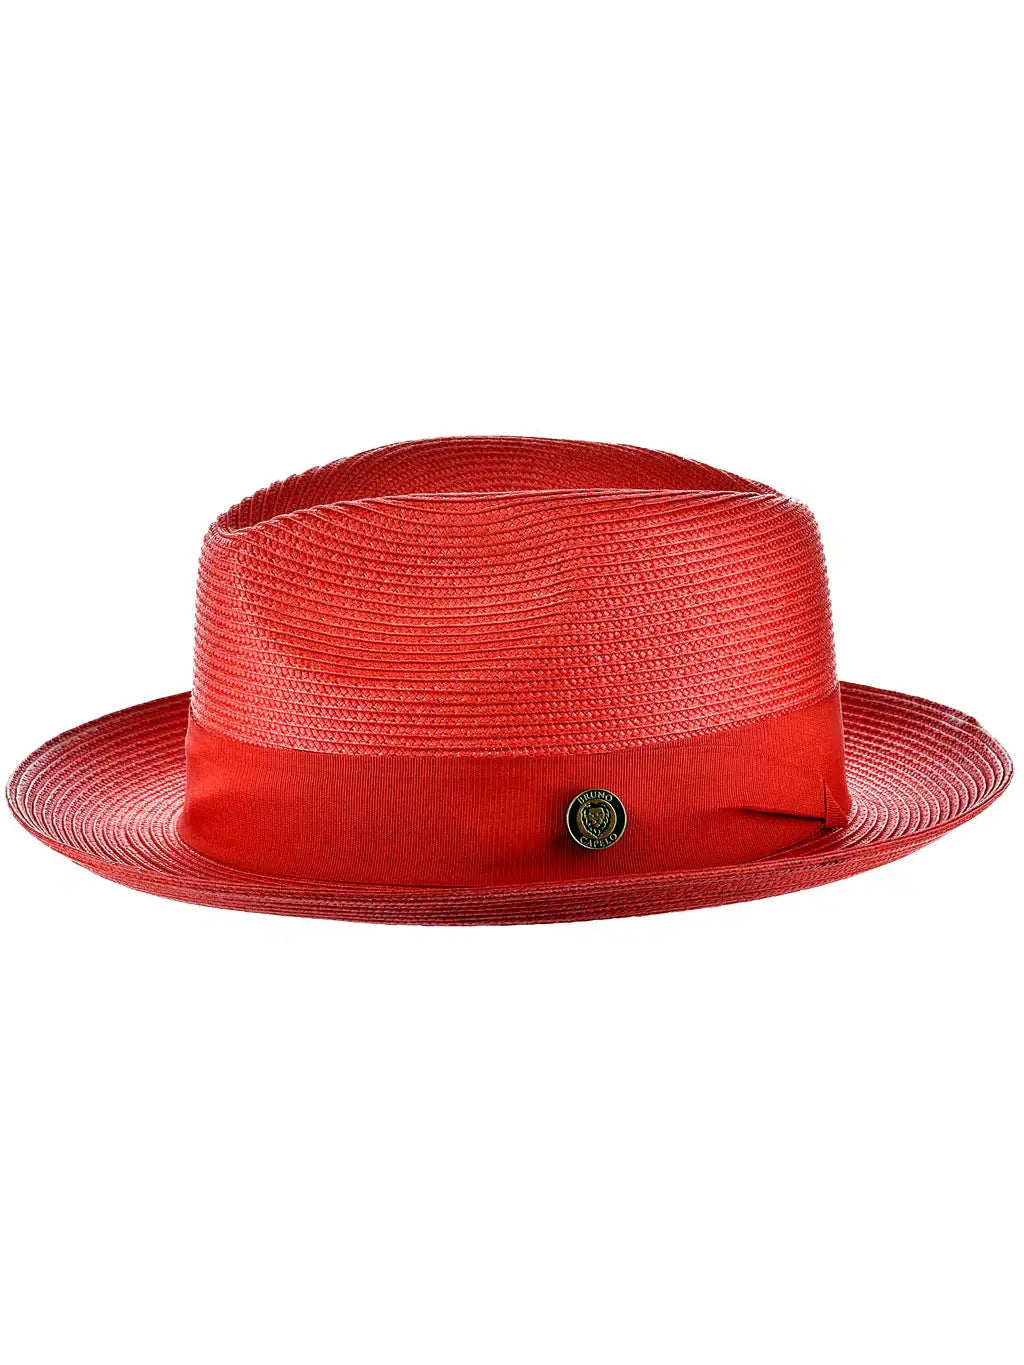 Mens The Francesco Red Straw Hat